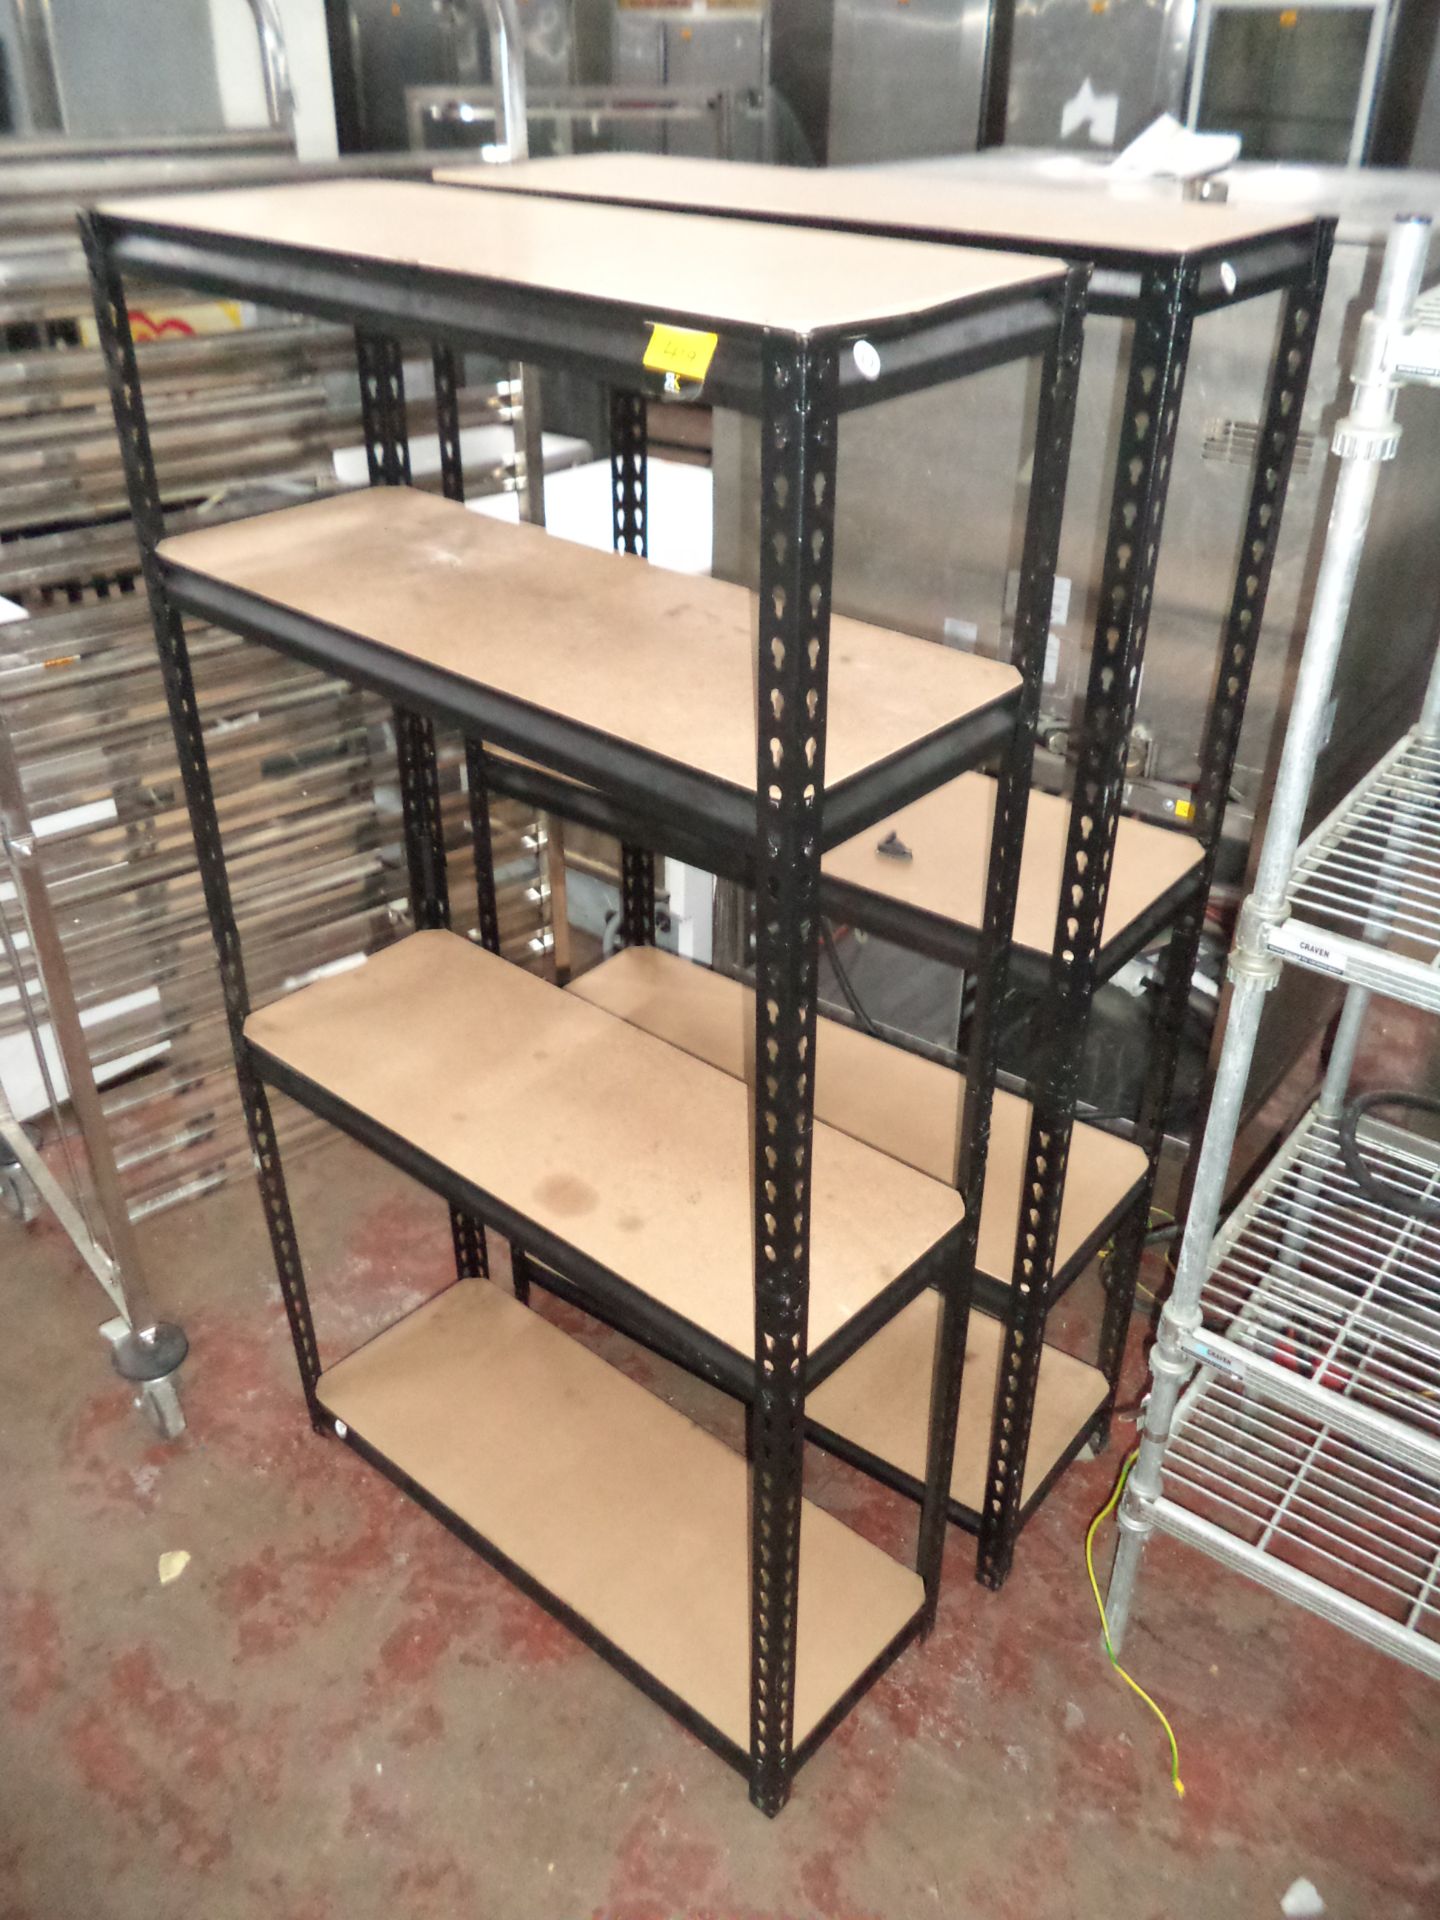 Two separate freestanding of bolt-free racking IMPORTANT: Please remember goods successfully bid